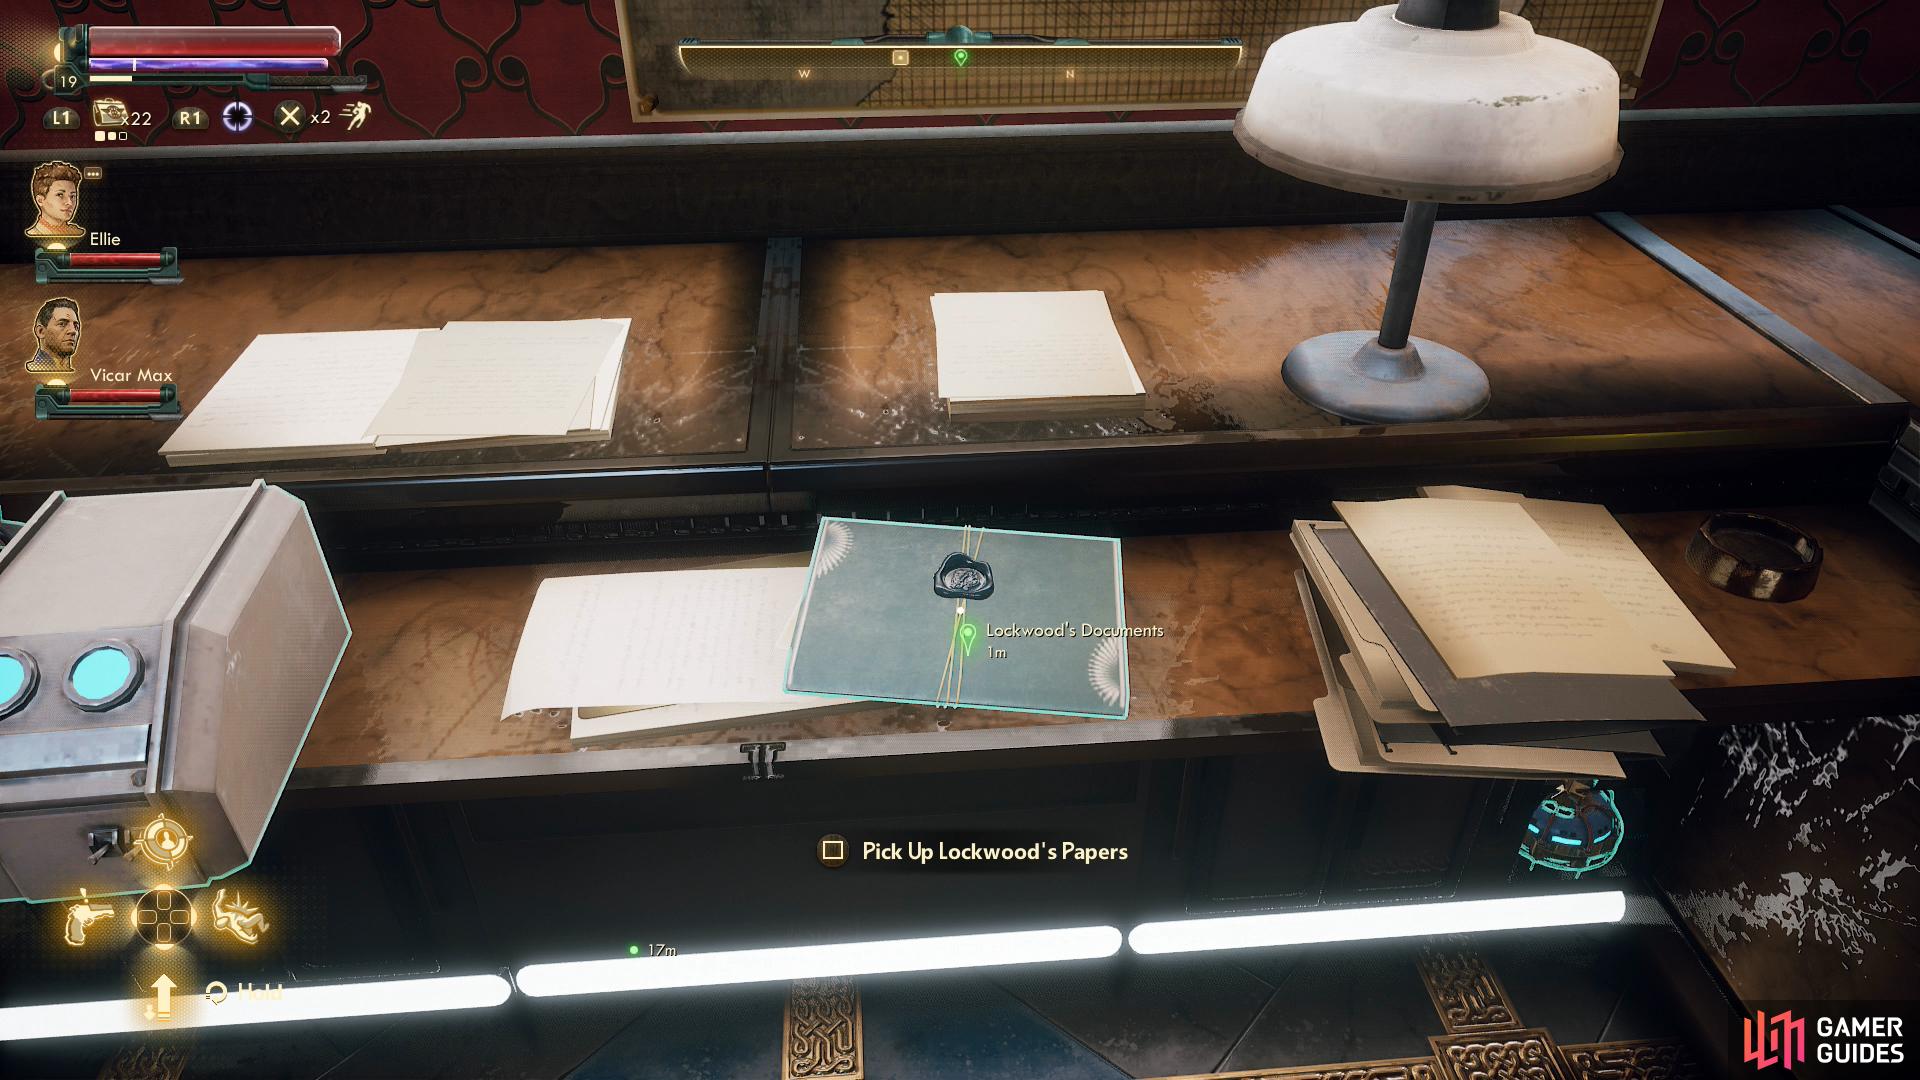 Search Lockwood's desk for some papers.